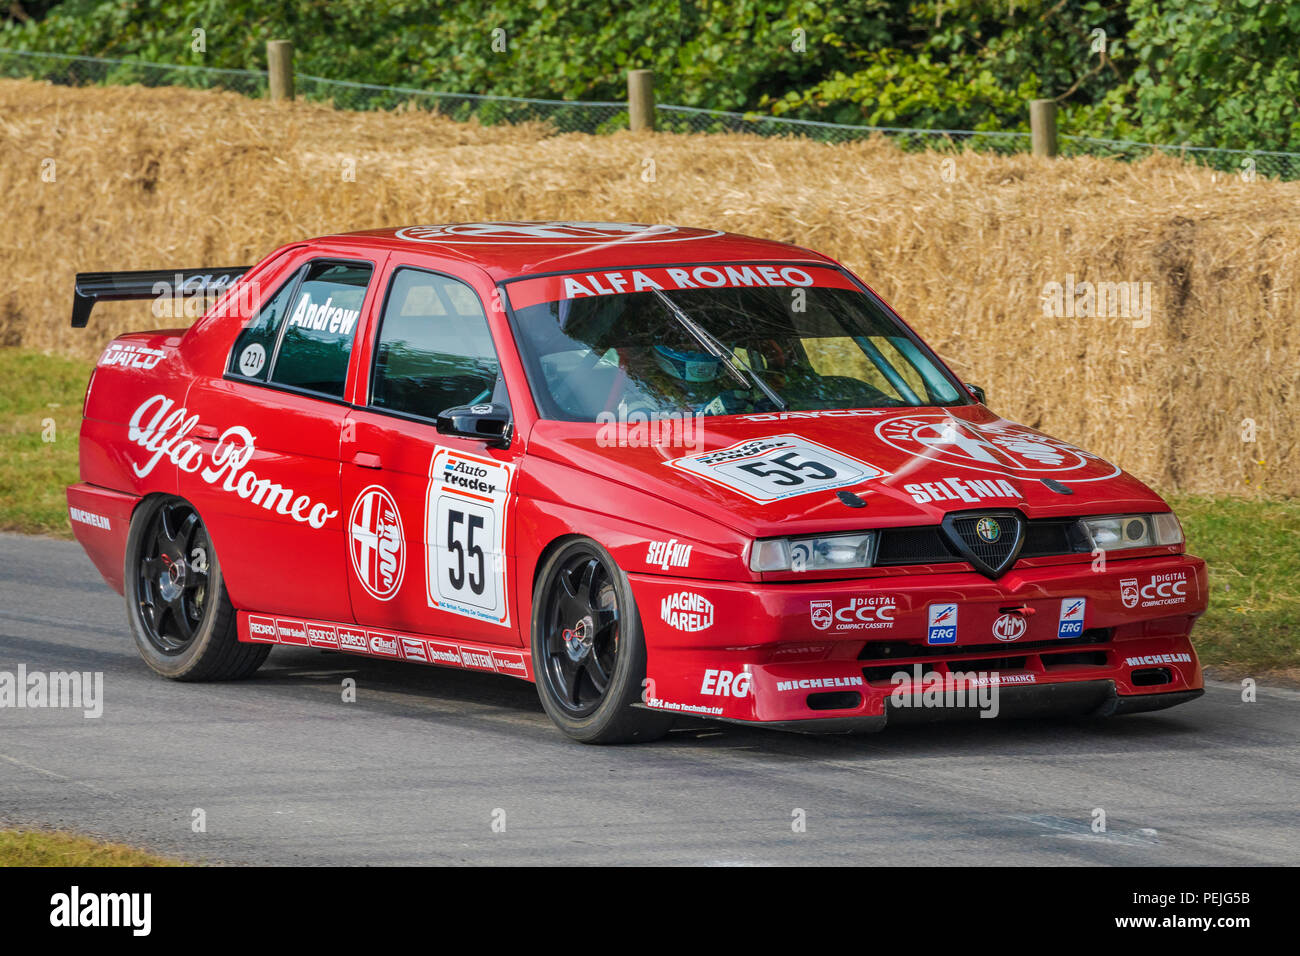 90 S 1990 S Nineties Btcc High Resolution Stock Photography And Images Alamy